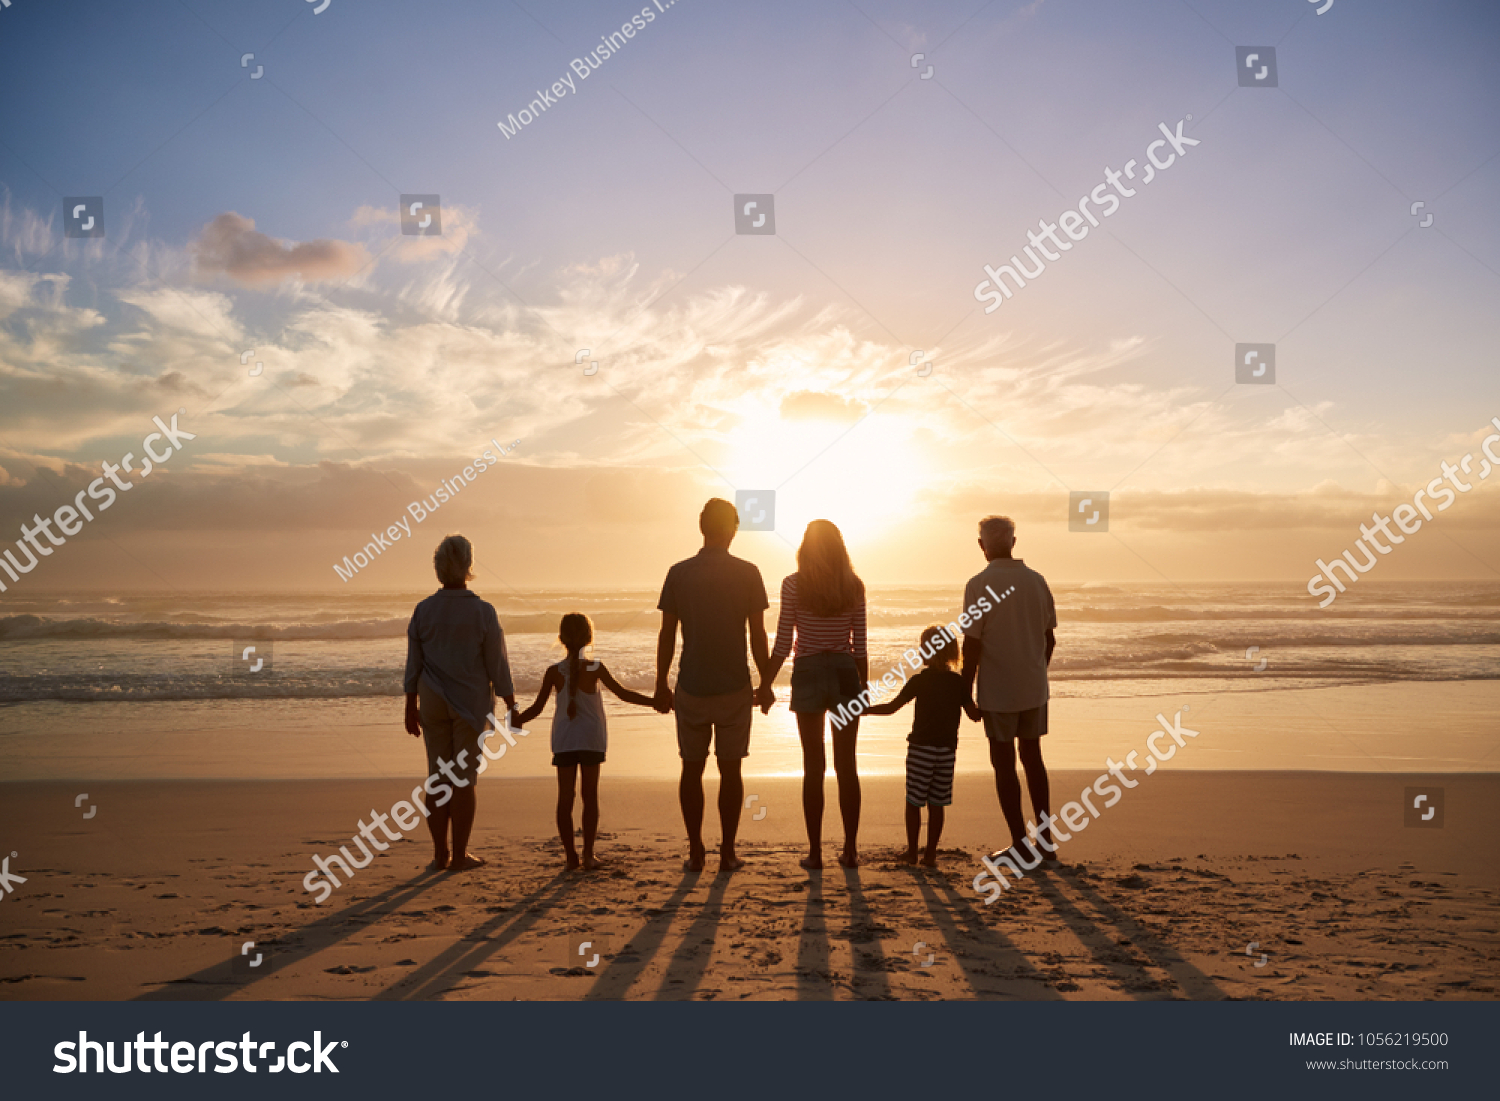 Rear View Of Multi Generation Family Silhouetted On Beach #1056219500